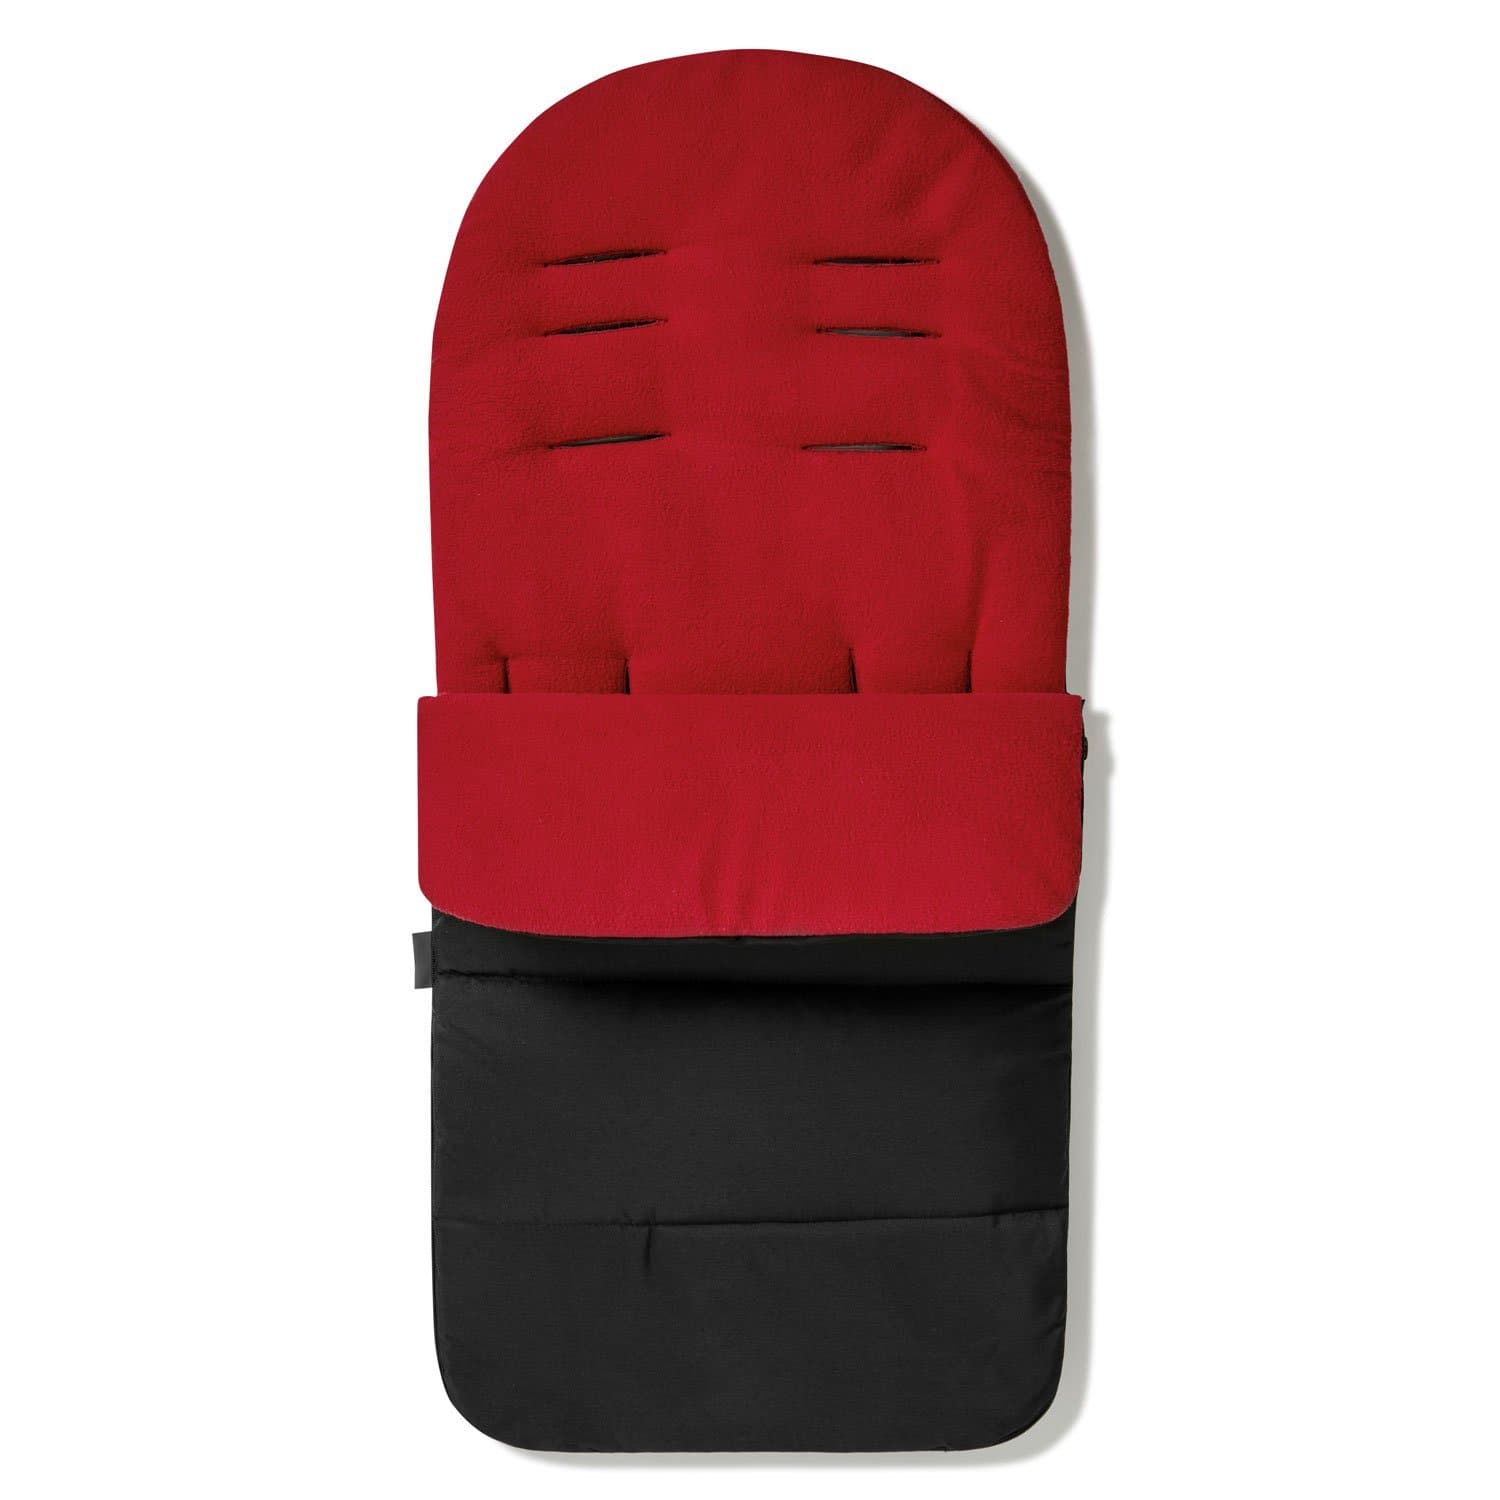 Premium Footmuff / Cosy Toes Compatible with Kiddicare - Fire Red / Fits All Models | For Your Little One